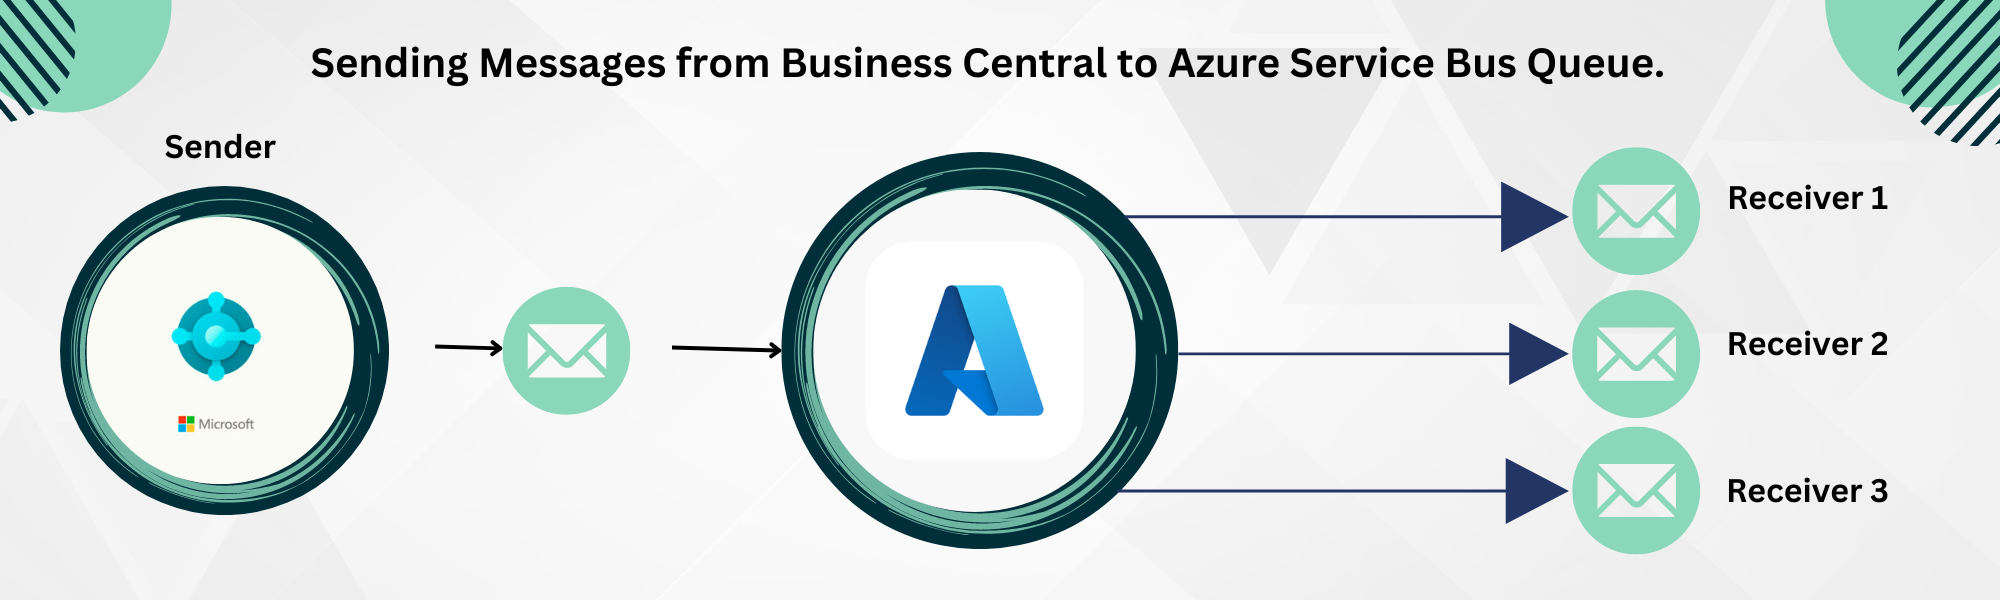 Sending Messages from Business Central to Azure Service Bus Queue.